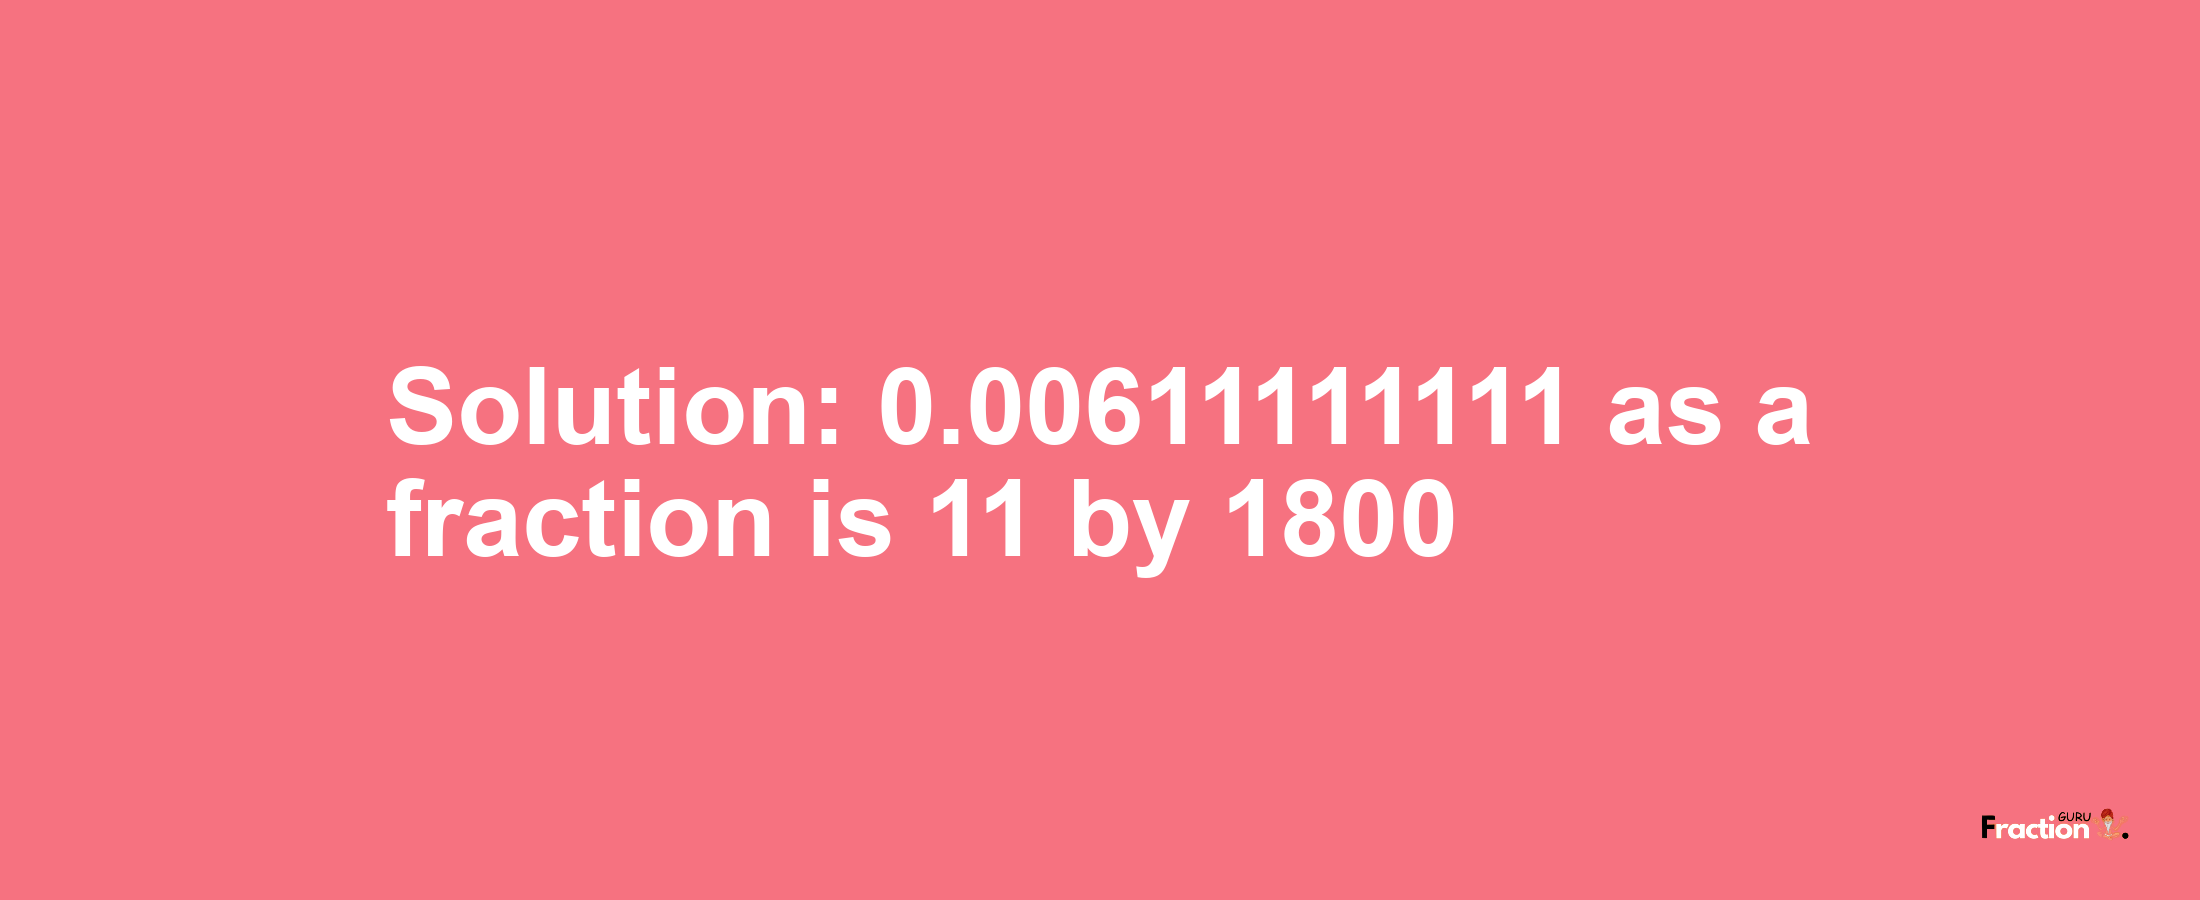 Solution:0.00611111111 as a fraction is 11/1800